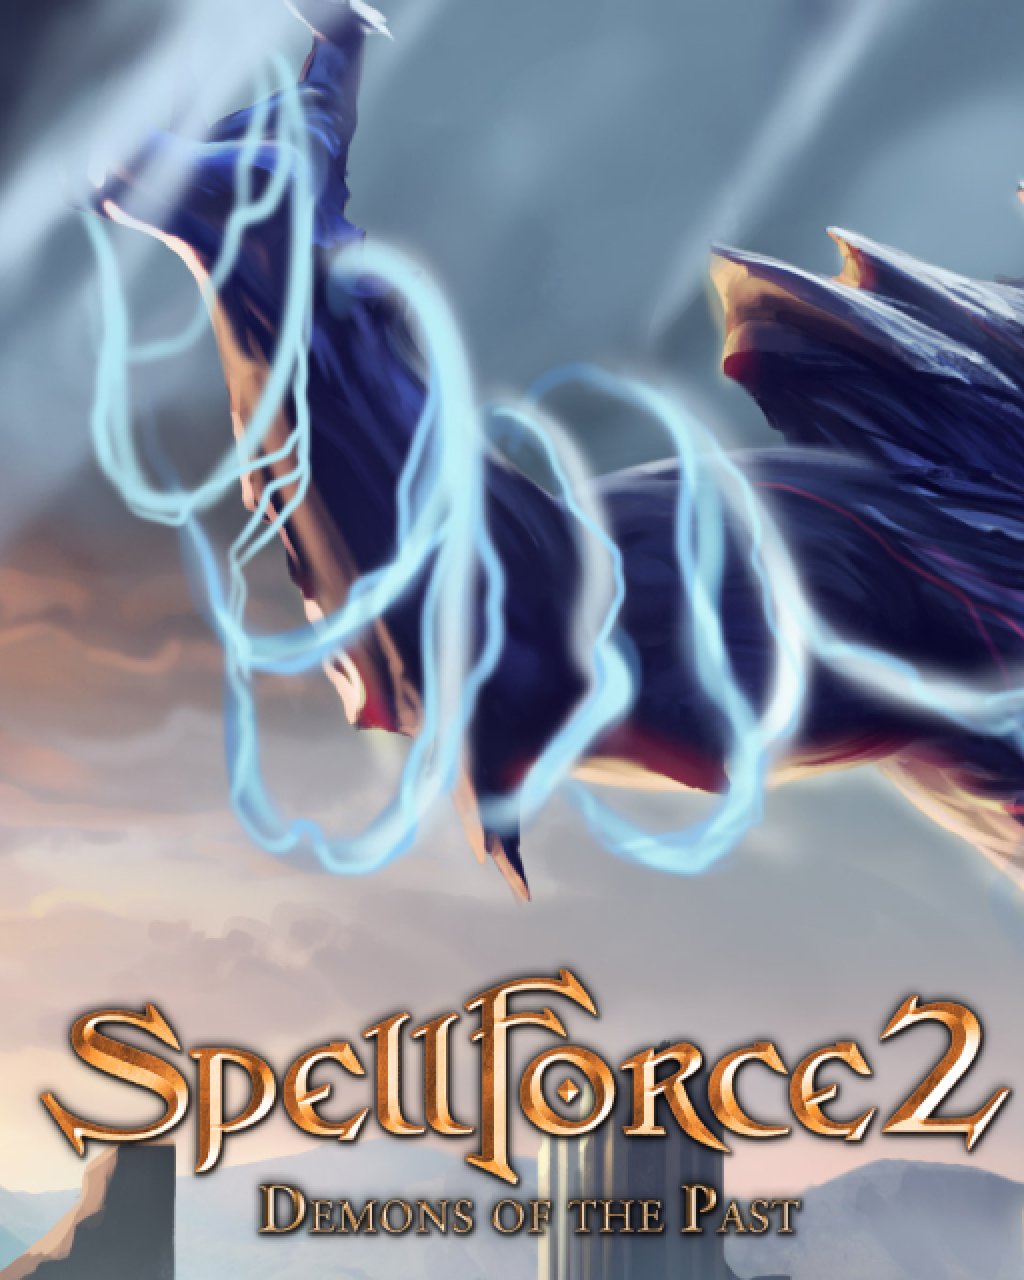 SpellForce 2 Demons of the Past